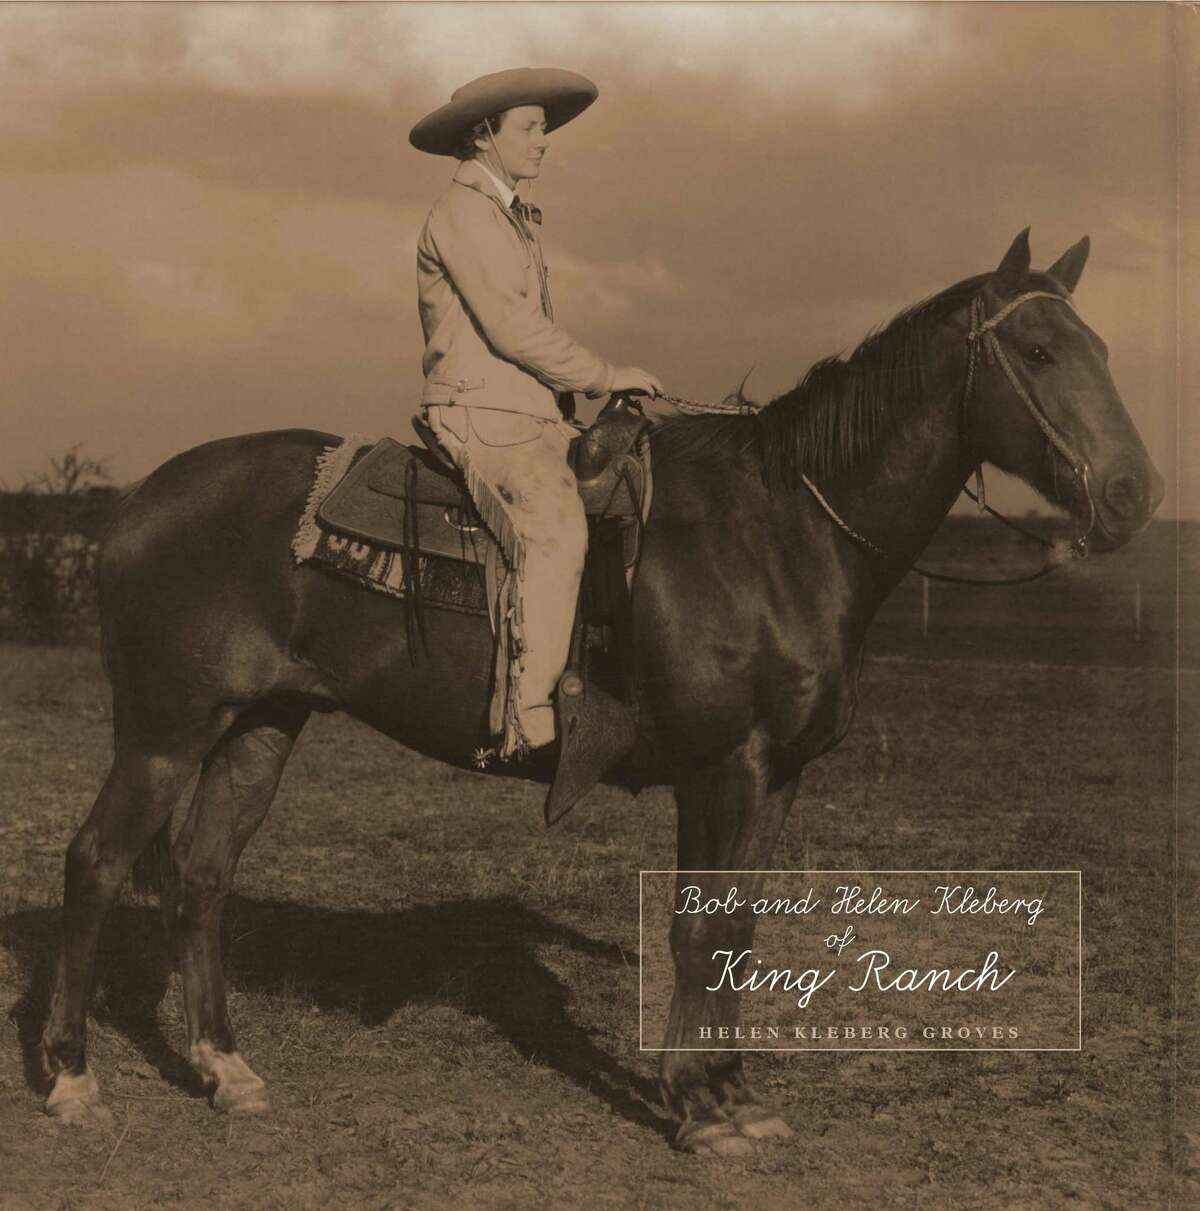 In her Kleberg's book, "Bob and Helen Kleberg of King Ranch" (Trinity University Press, 2017), Helen Kleberg Groves tells stories about the fabled ranch in the middle years of the 20th century.